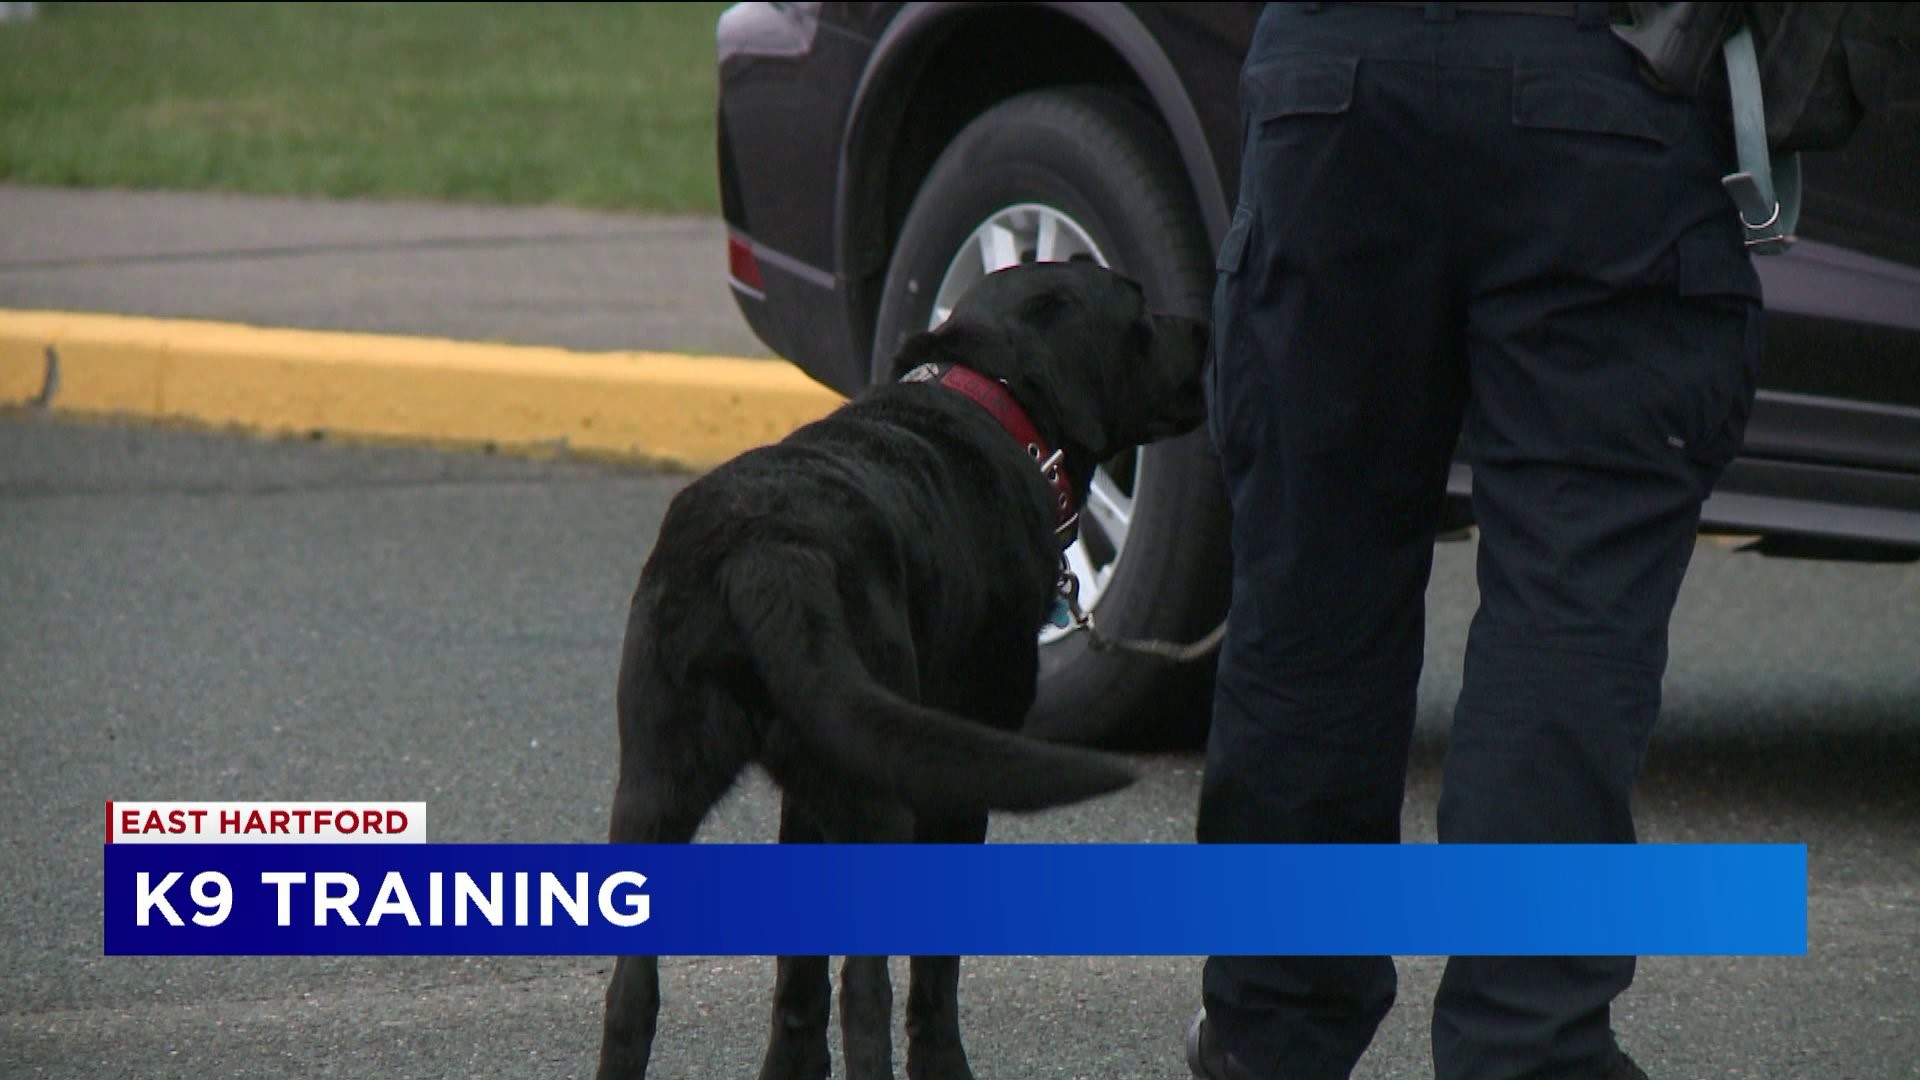 State police training the next generation of bomb sniffing dogs